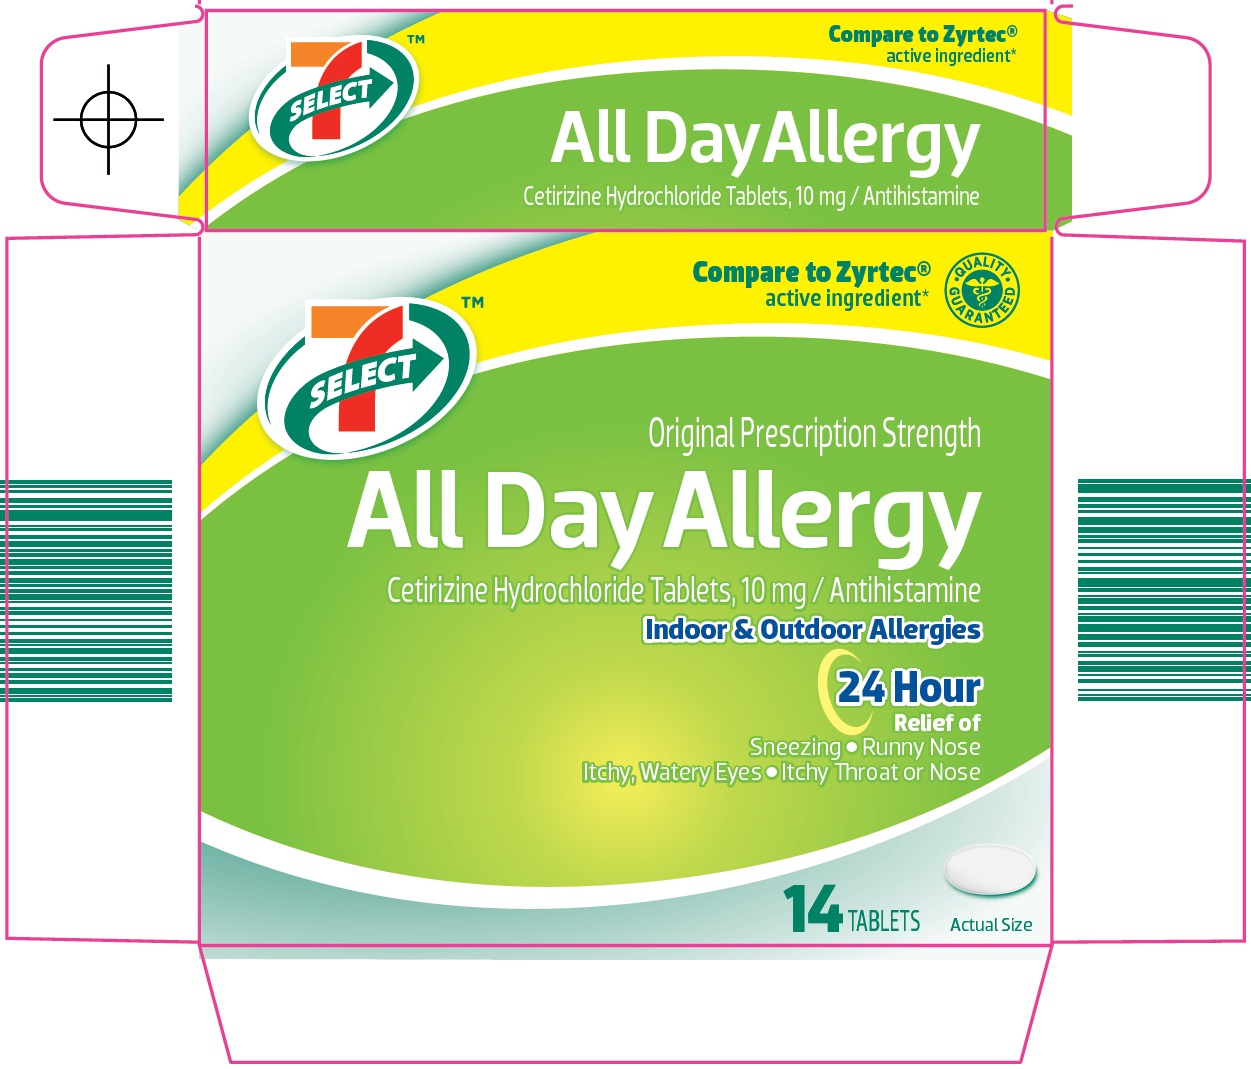 7 Select All Day Allergy Image 1